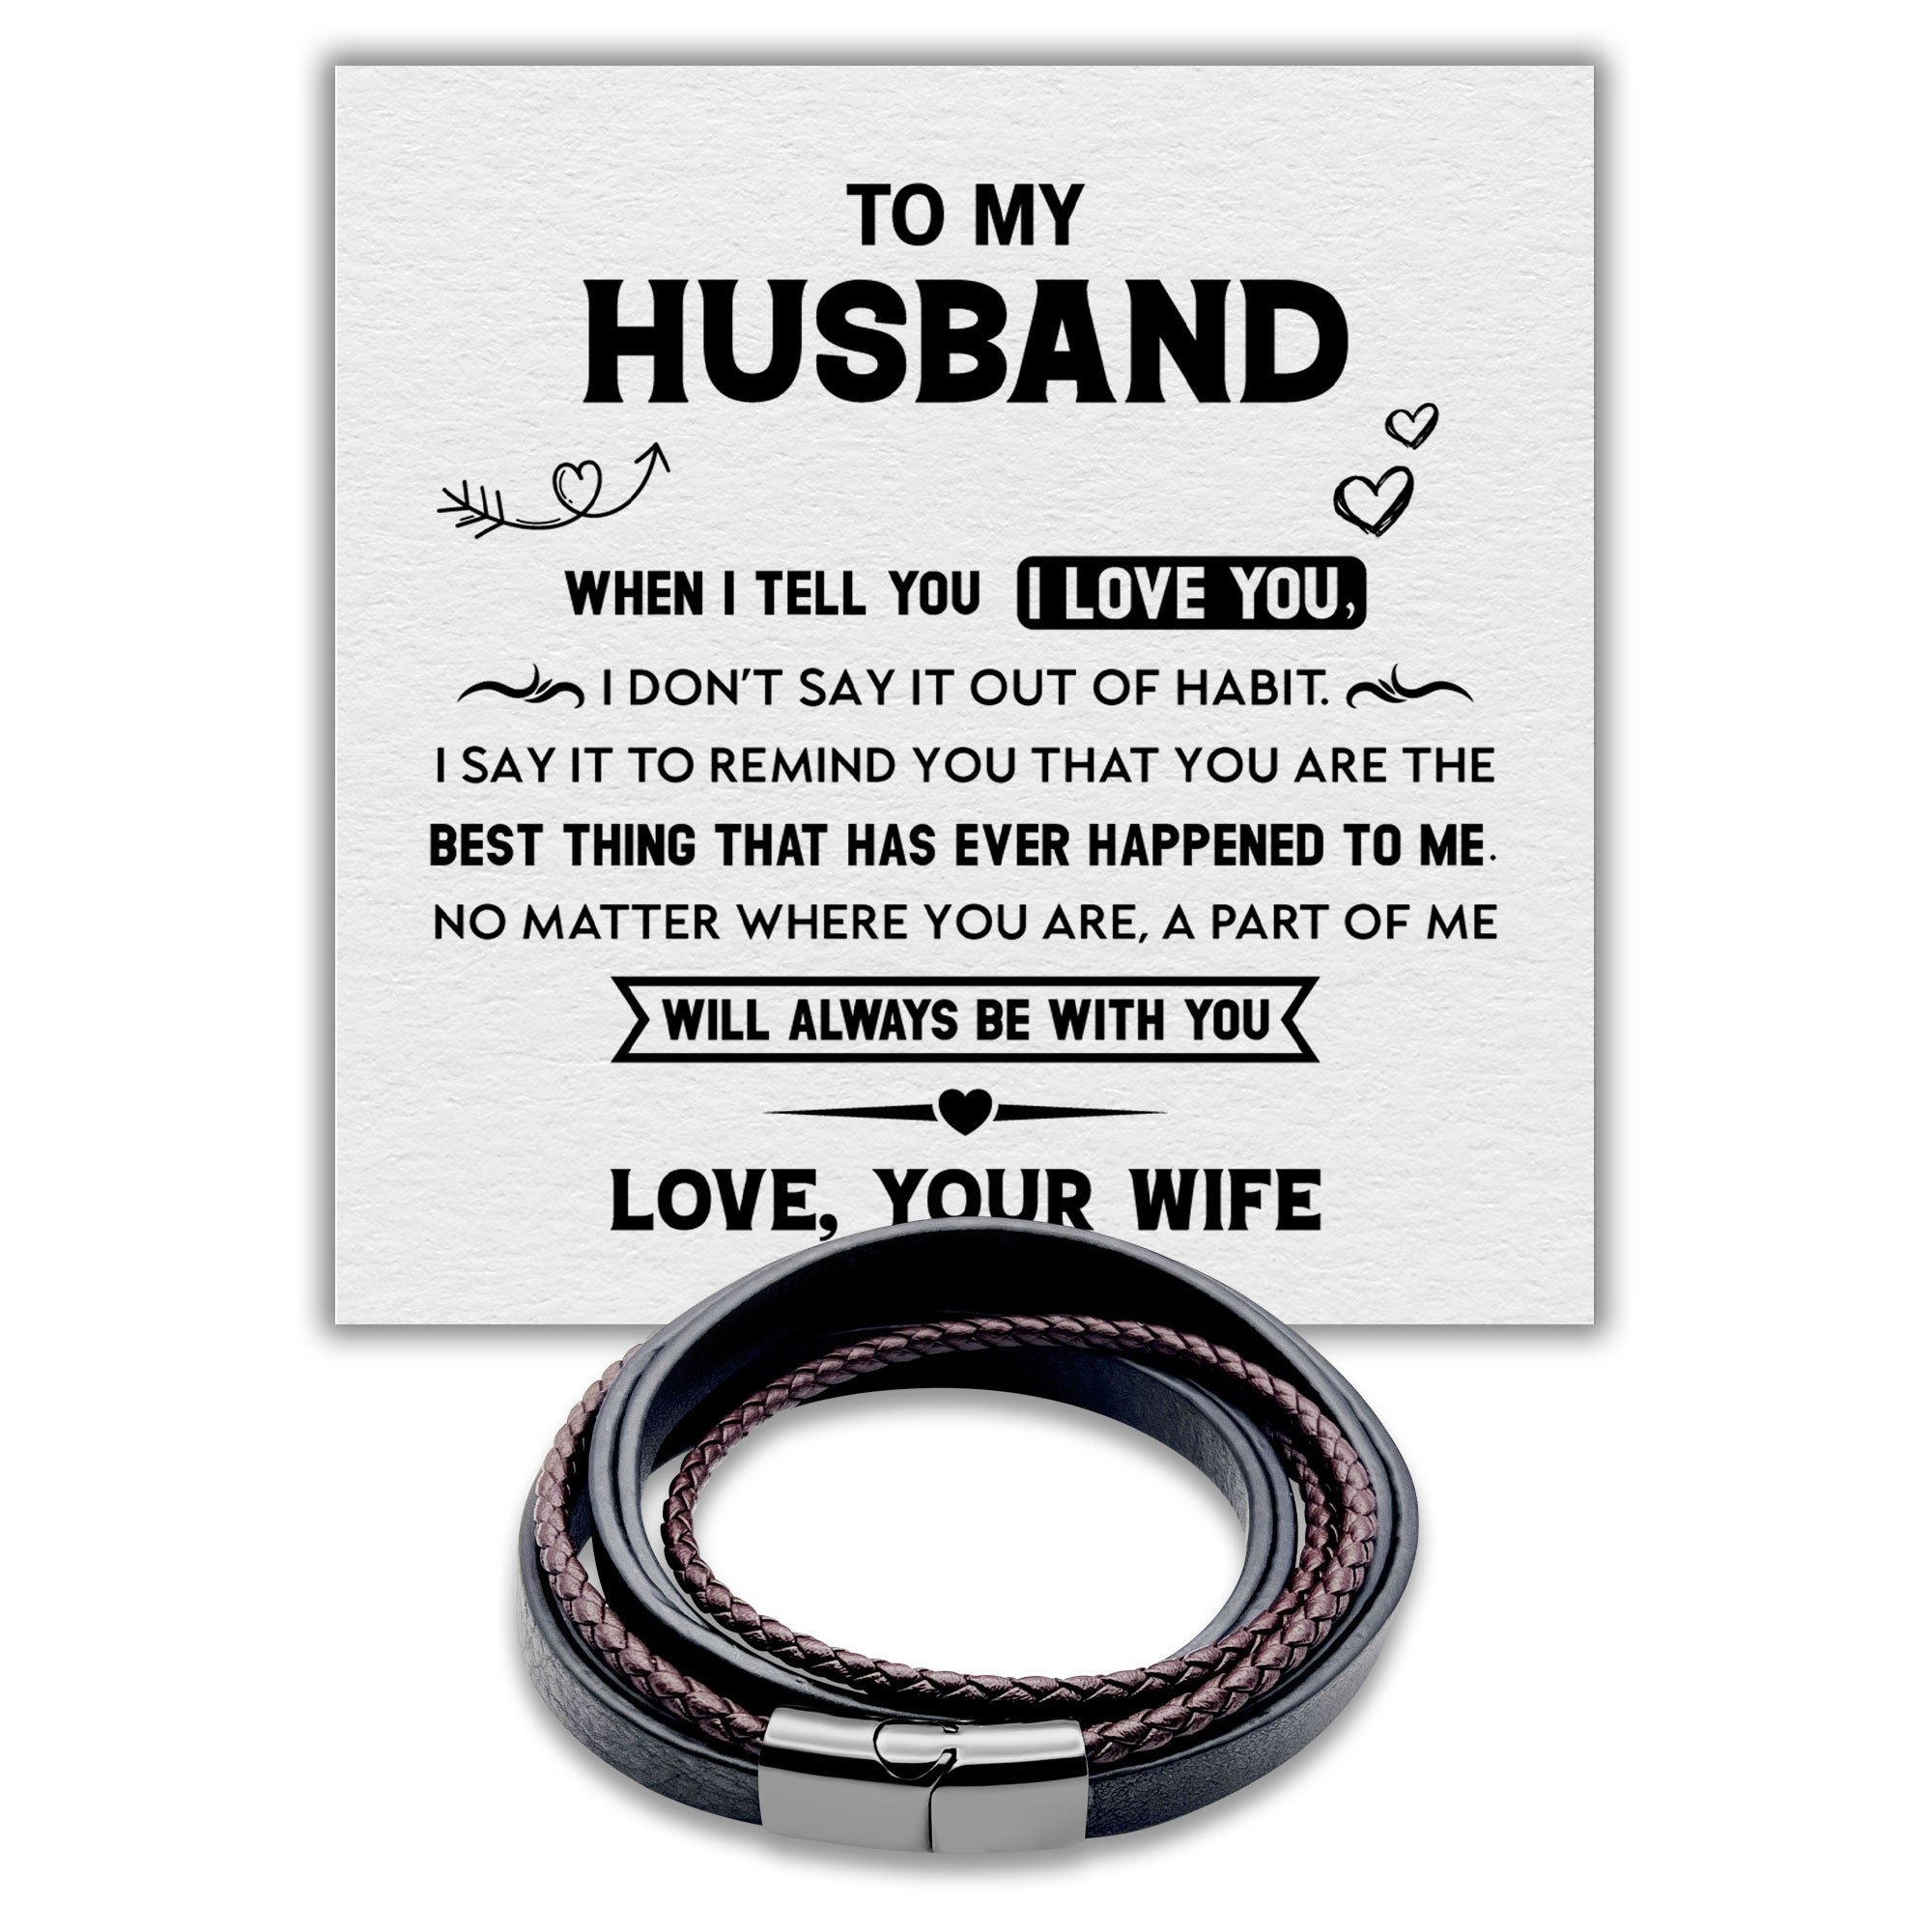 To my Husband I Love You - Premium Stainless Steel Italian Leather Braided Two-Tone Layer Bracelet for Men